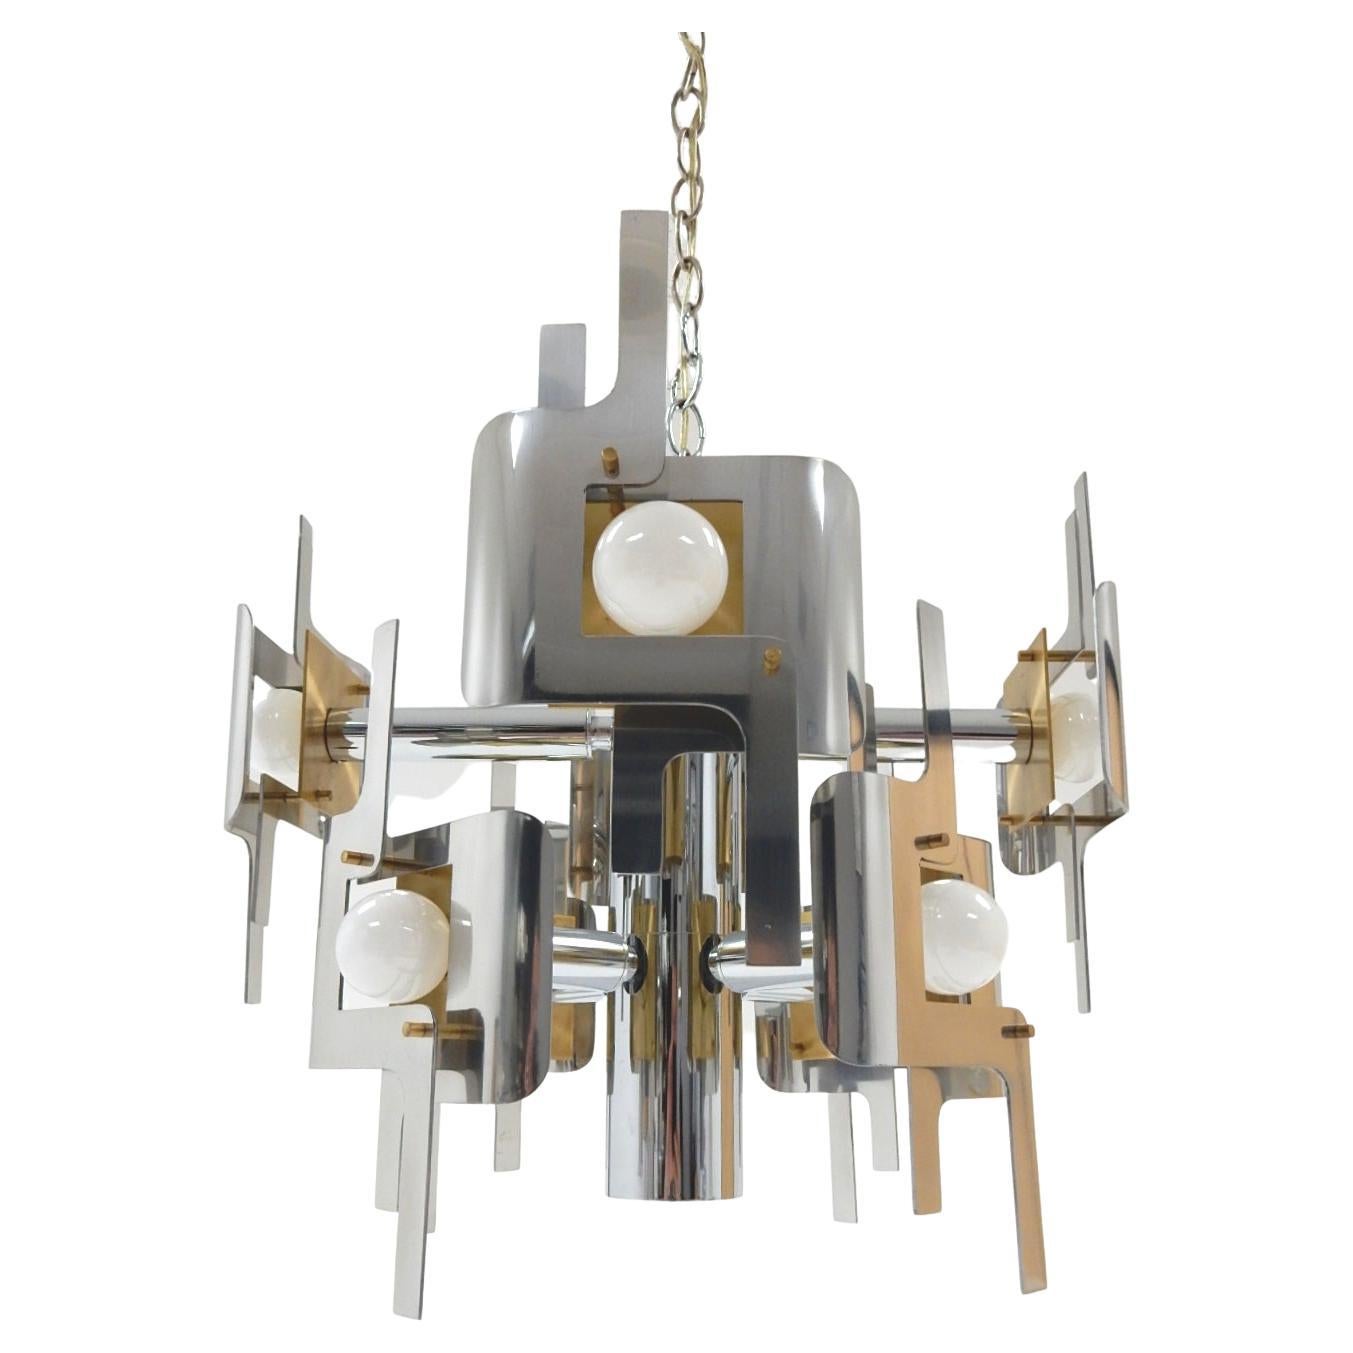 1970s Chrome and Brass Chandelier Lamp